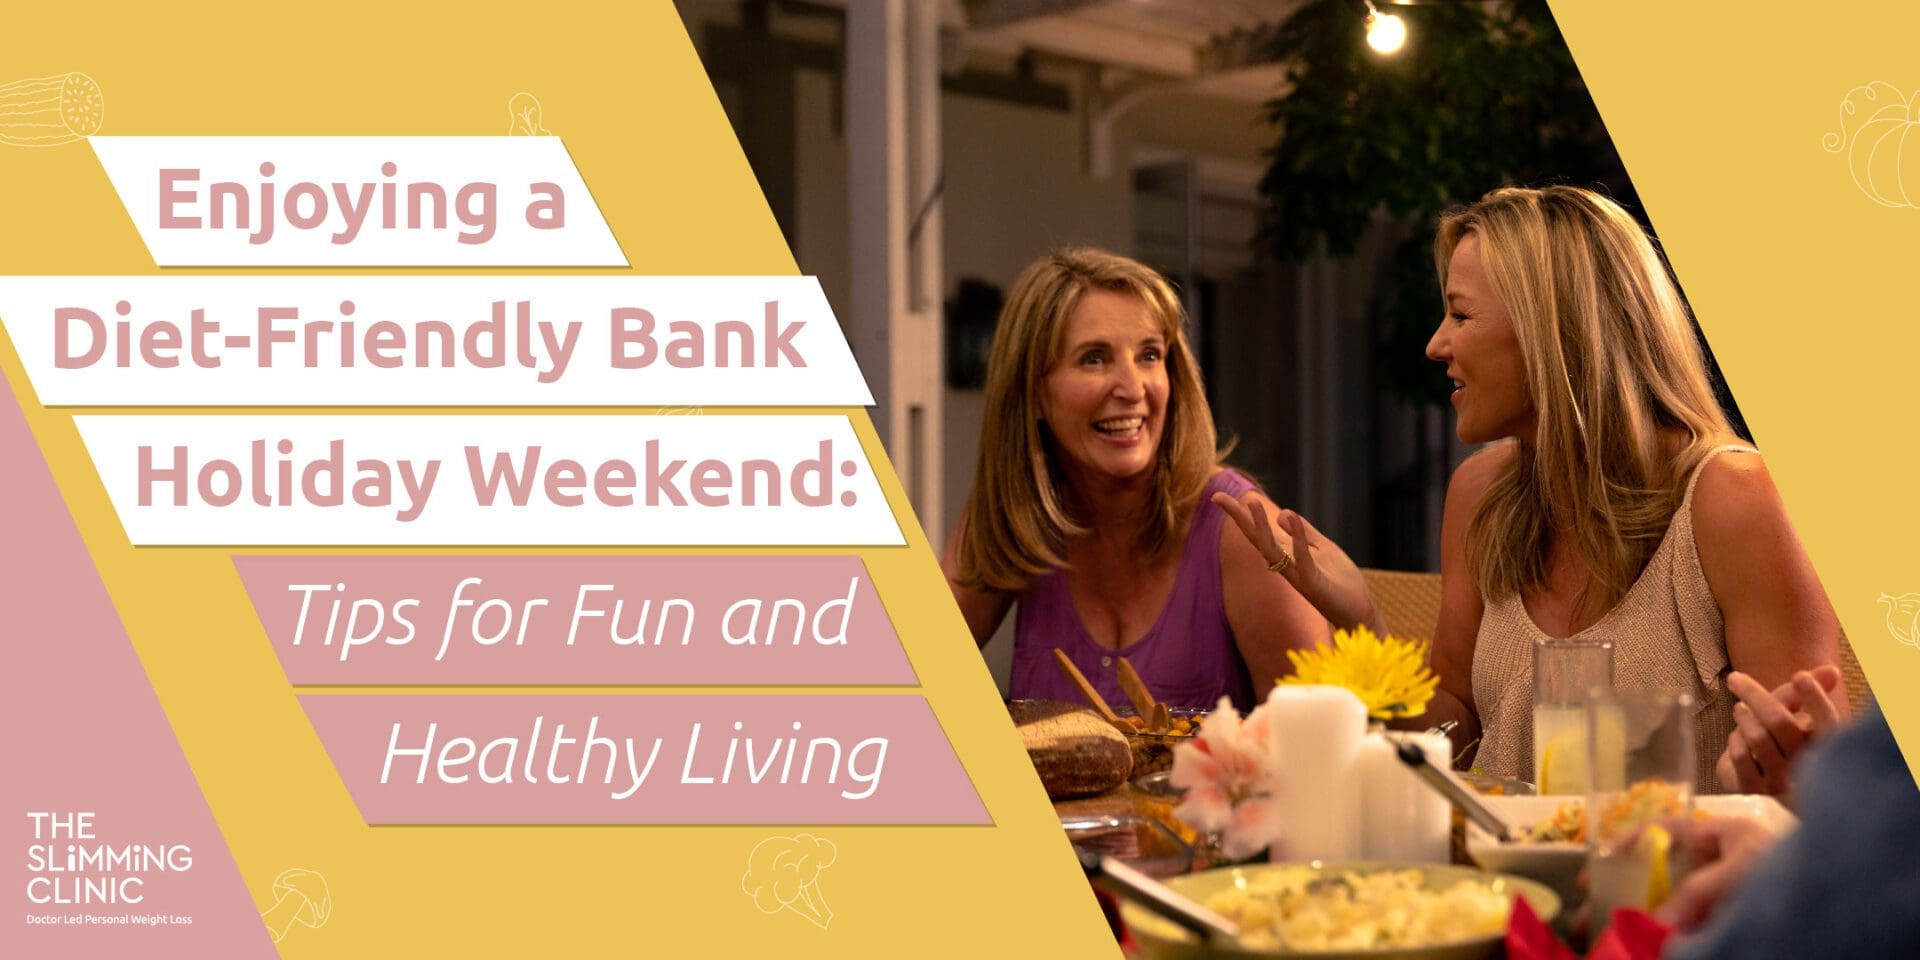 Enjoying a Diet-Friendly Bank Holiday Weekend: Tips for Fun and Healthy Living